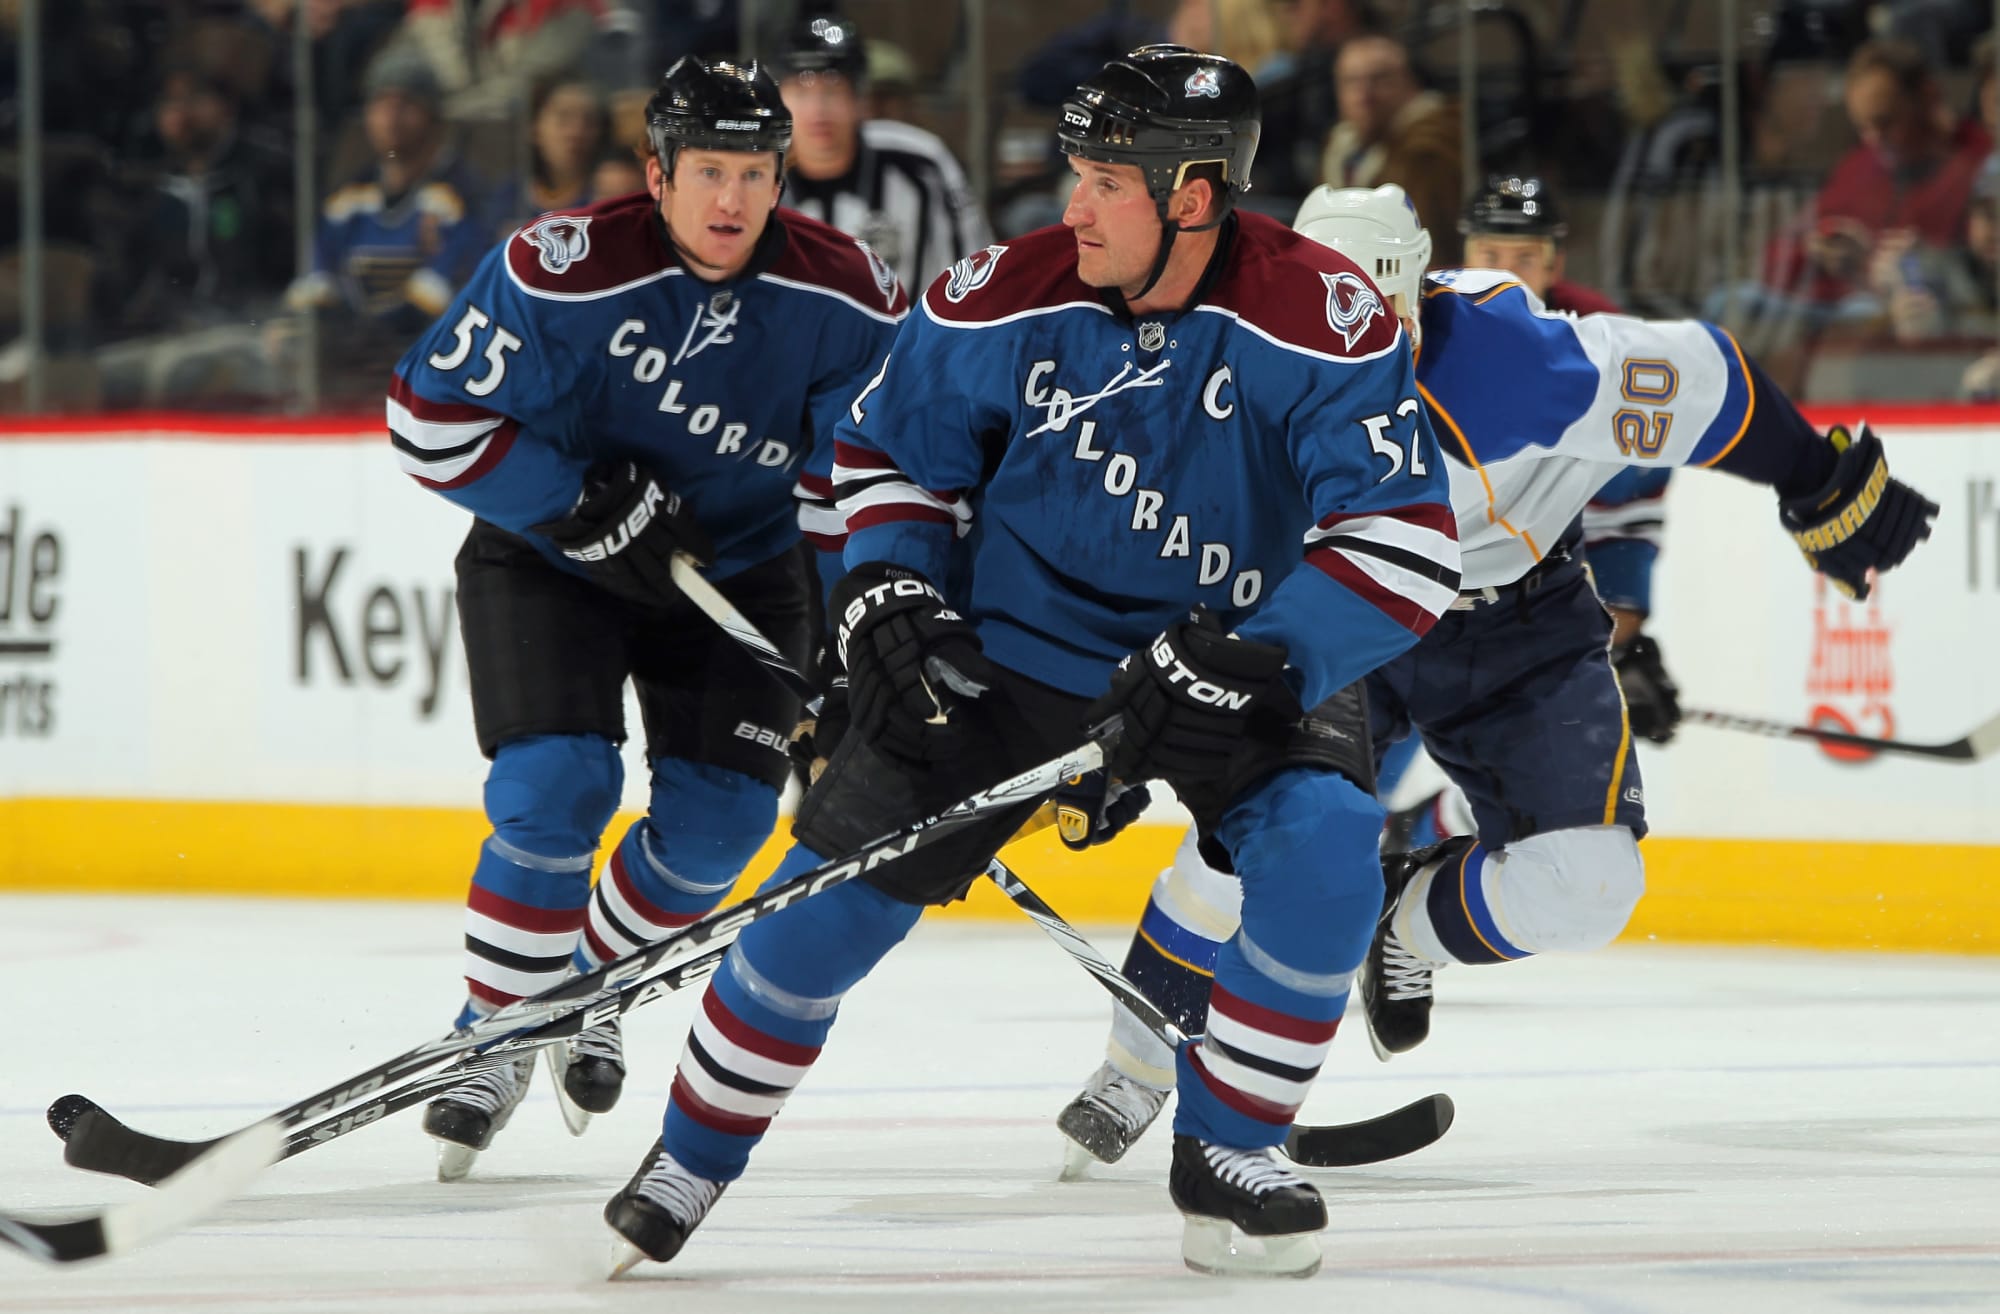 Colorado Avalanche Release Decade in Review: 10 Moments